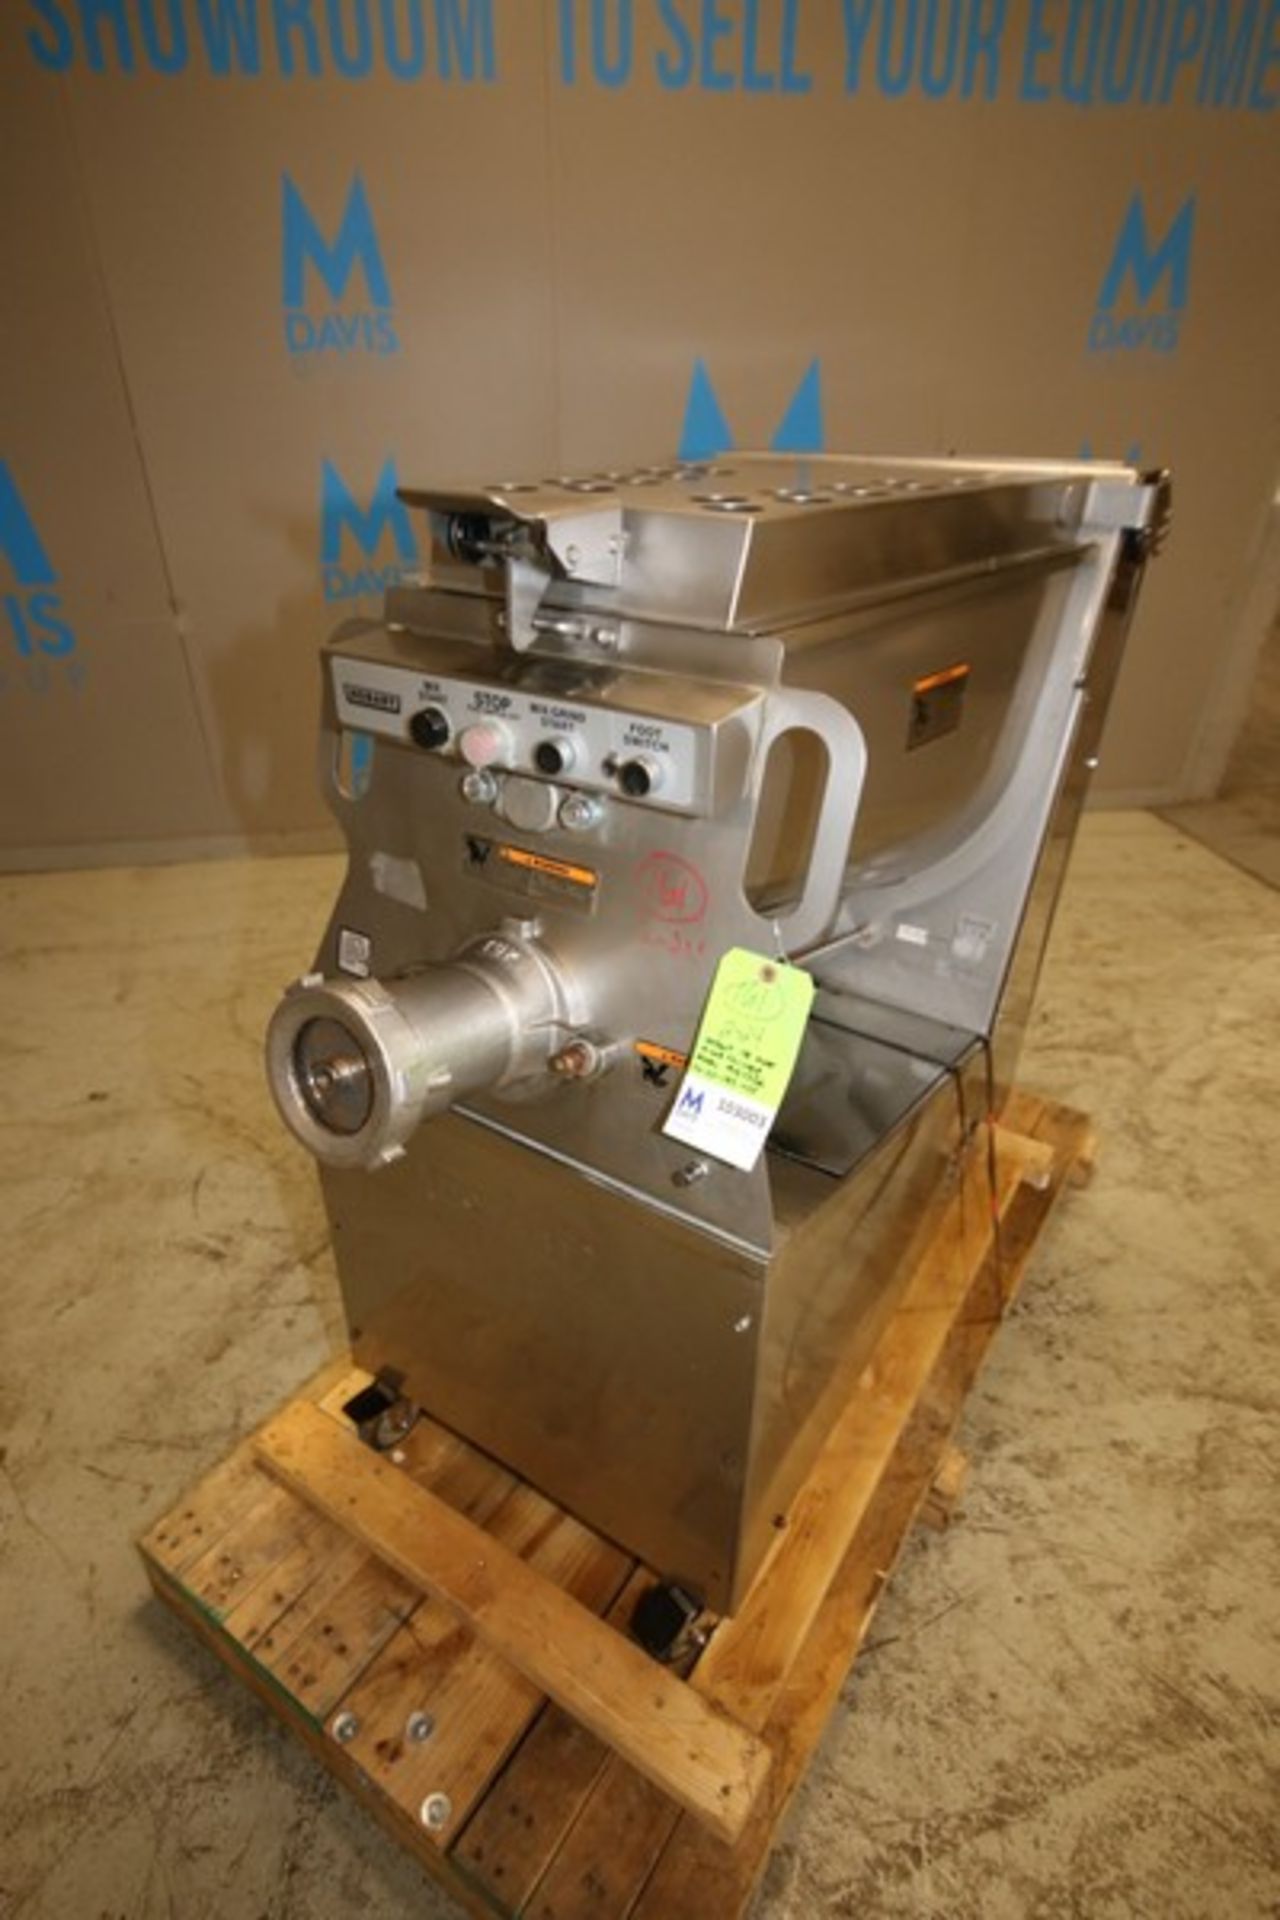 Hobart S/S 150 lb. Capacity Portable Meat Mixer / Grinder, Model MG1532, SN 27-1183-453, with - Image 2 of 8